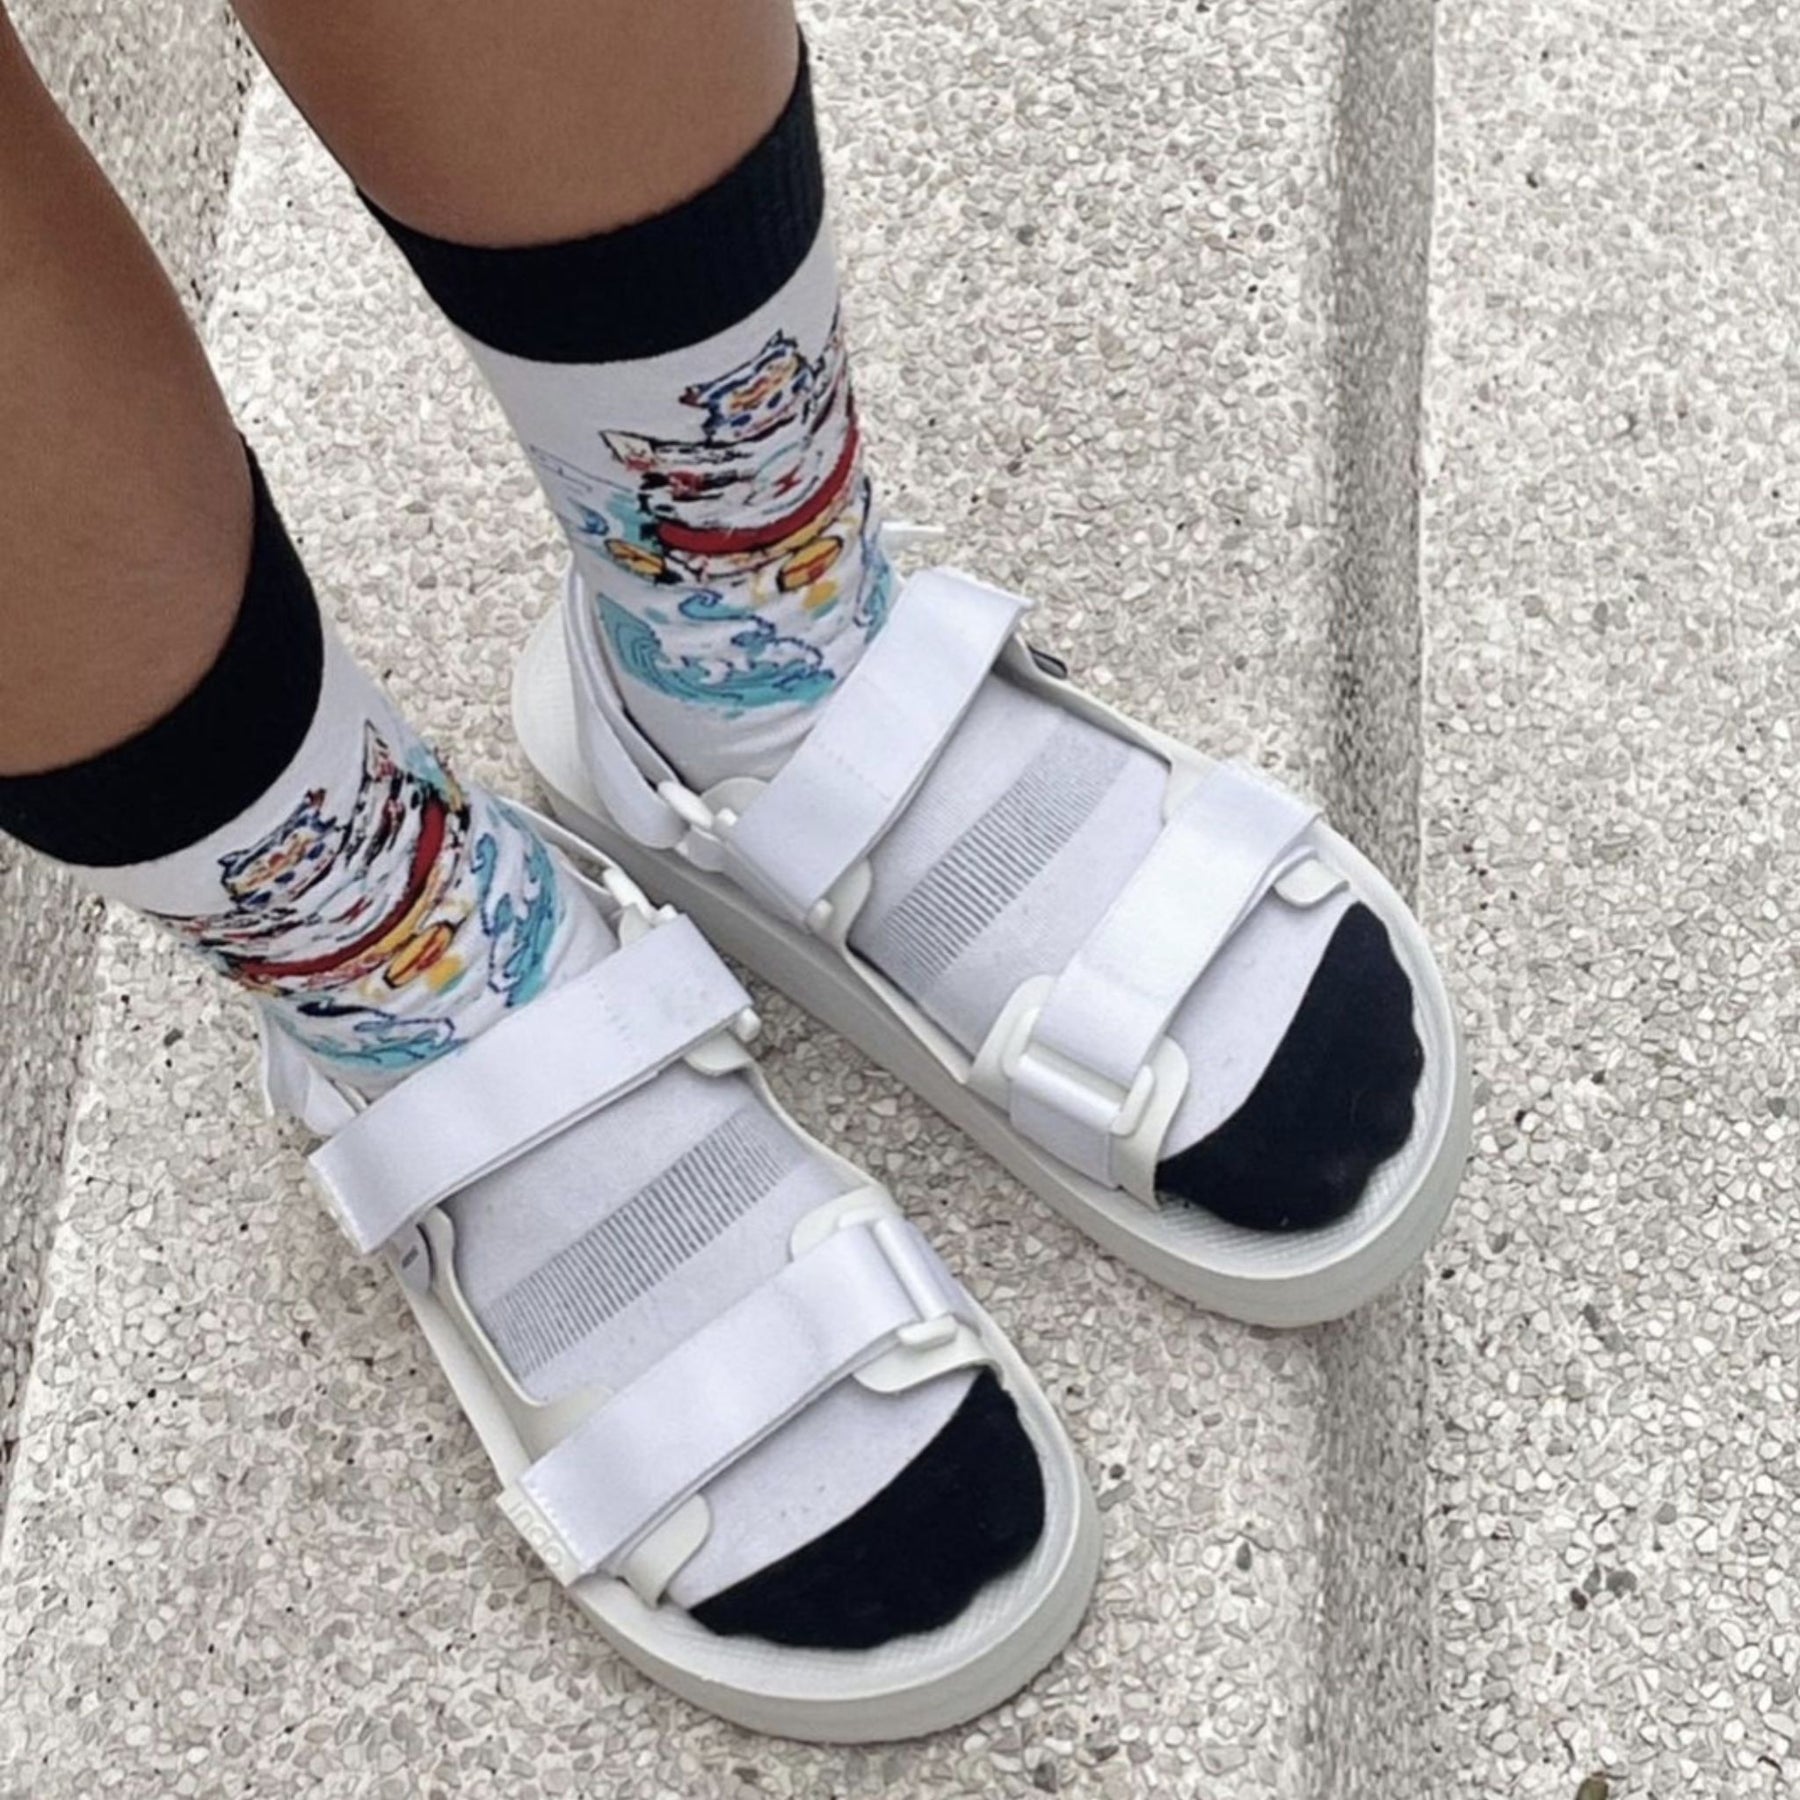 Woman wearing white adventure sandals with socks